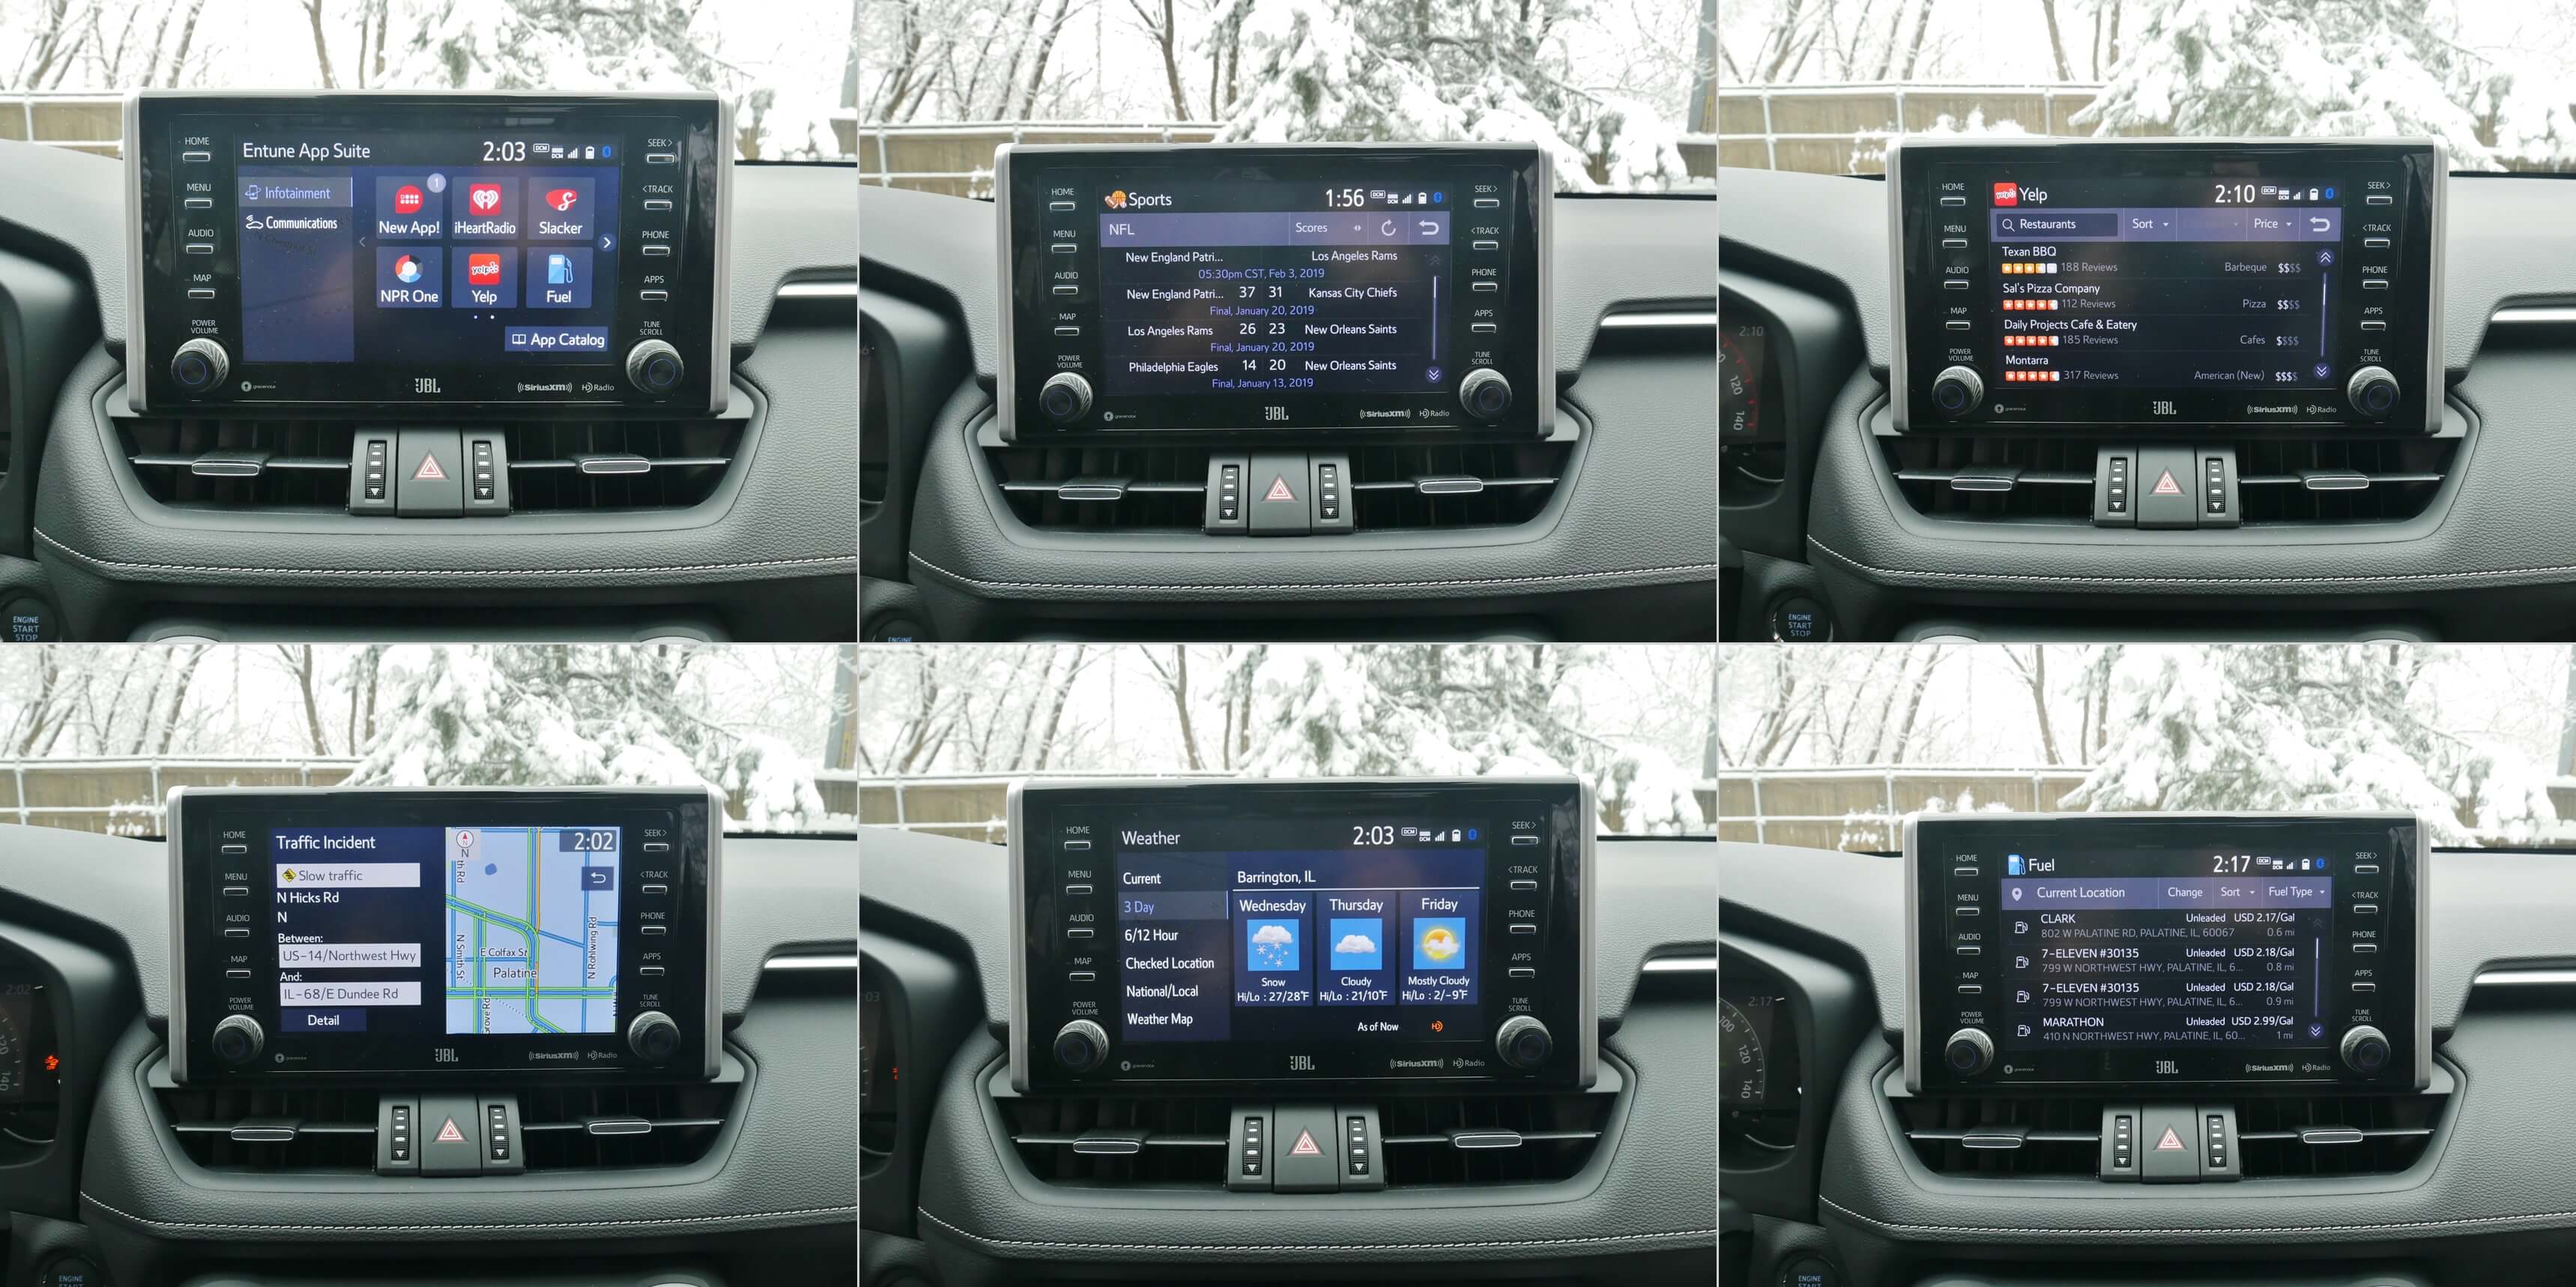 2019 Toyota RAV4 Limited AWD: included Entune 3.0 Apps for news, entertainment and travel display on center dash-top pod mount 8.0 touch LCD screen